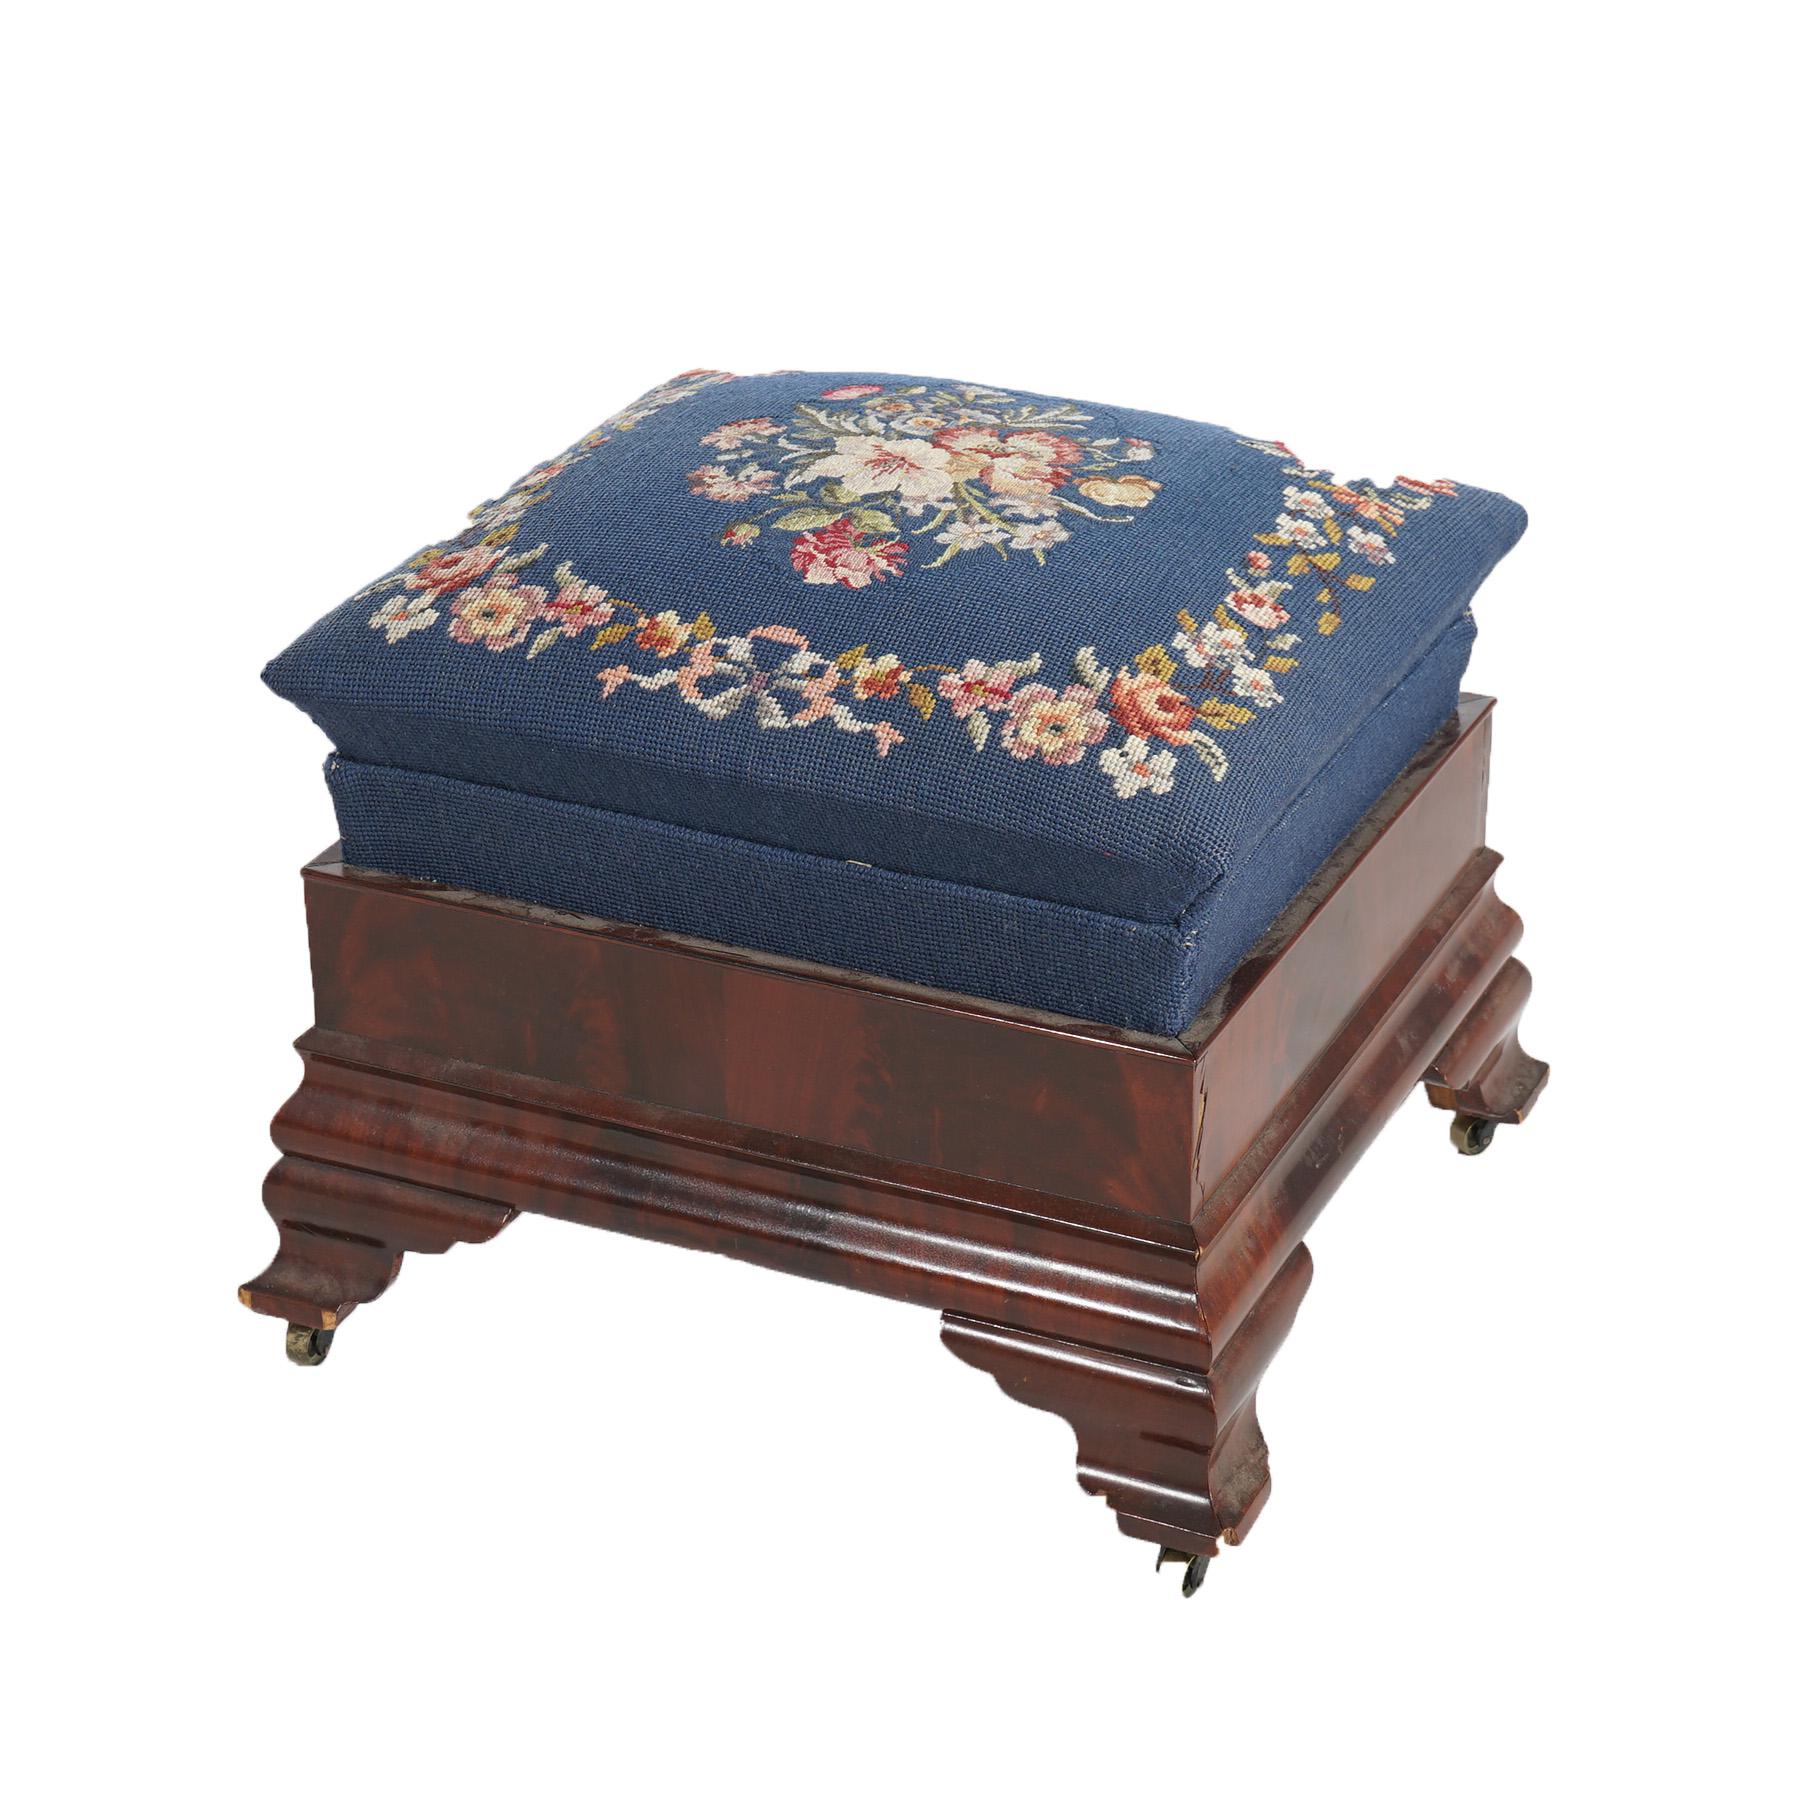 ***Ask About Reduced In-House Shipping Rates - Reliable Service & Fully Insured***
Antique American Empire Classical Greco Flame Mahogany & Floral Needlepoint Footstool 19thC

Measures- 17''H x 18.25''W x 18.25''D